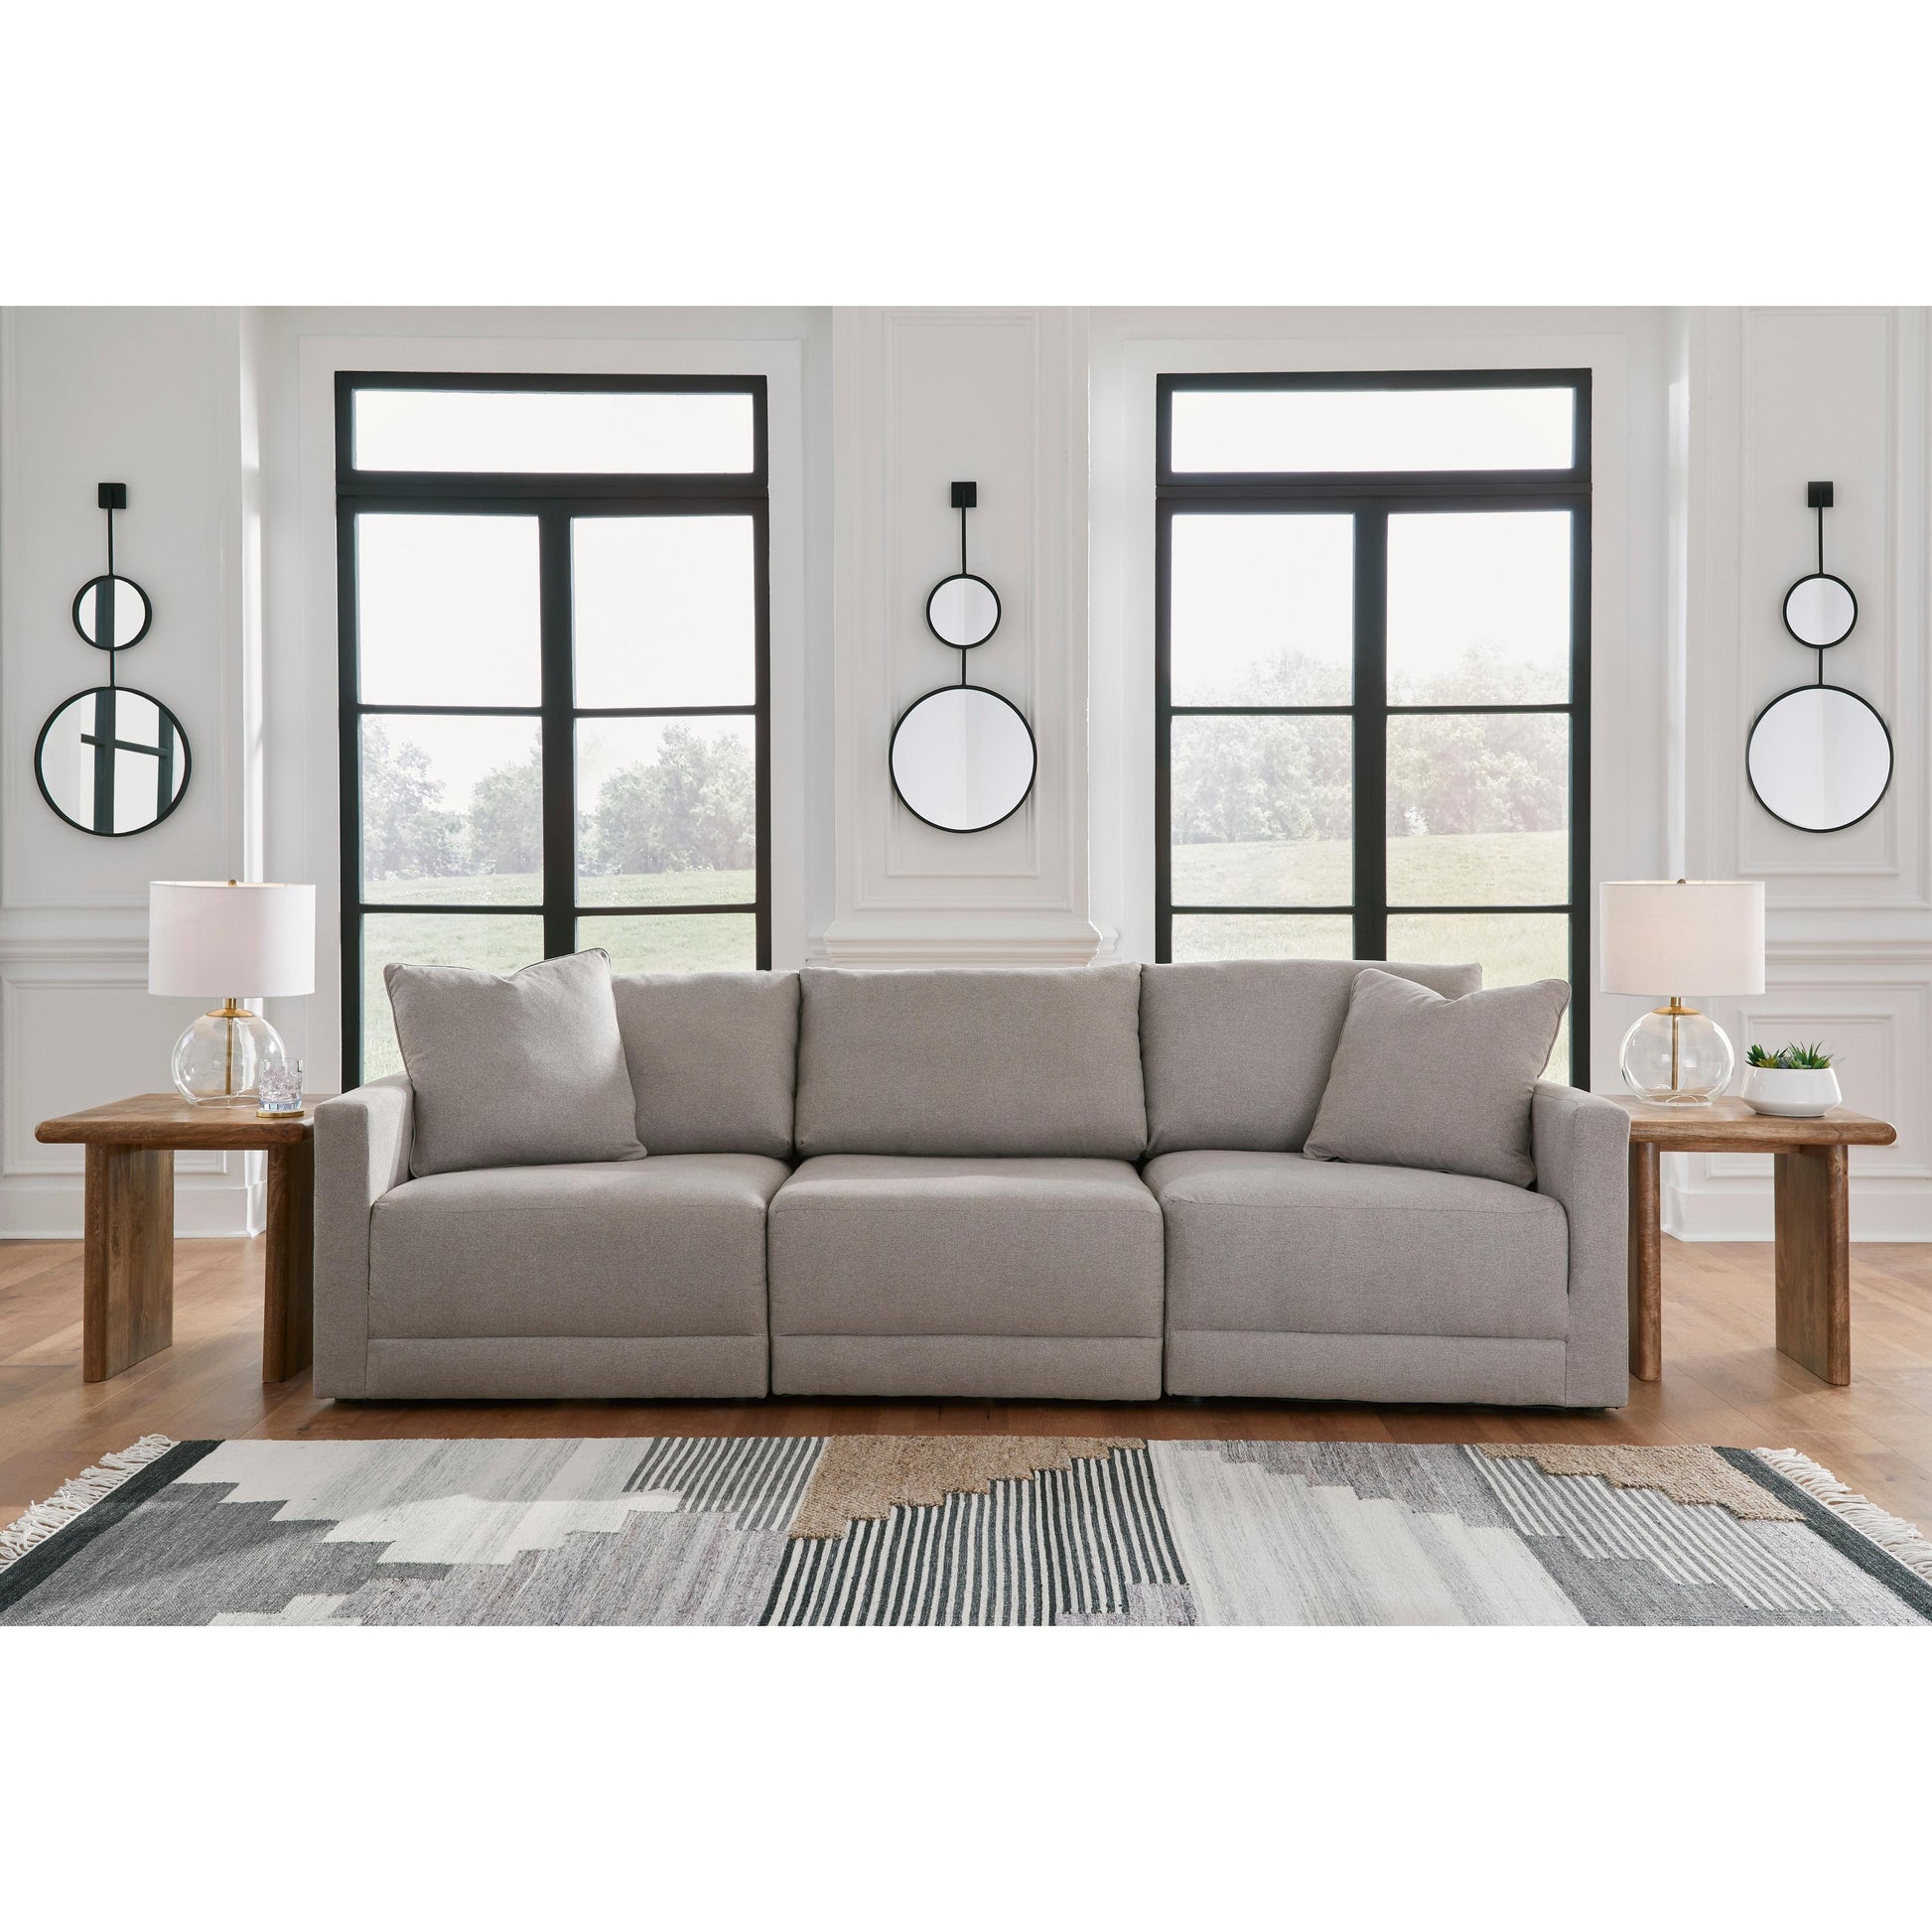 Benchcraft Katany Fabric 3 pc Sectional 2220146/2220164/2220165